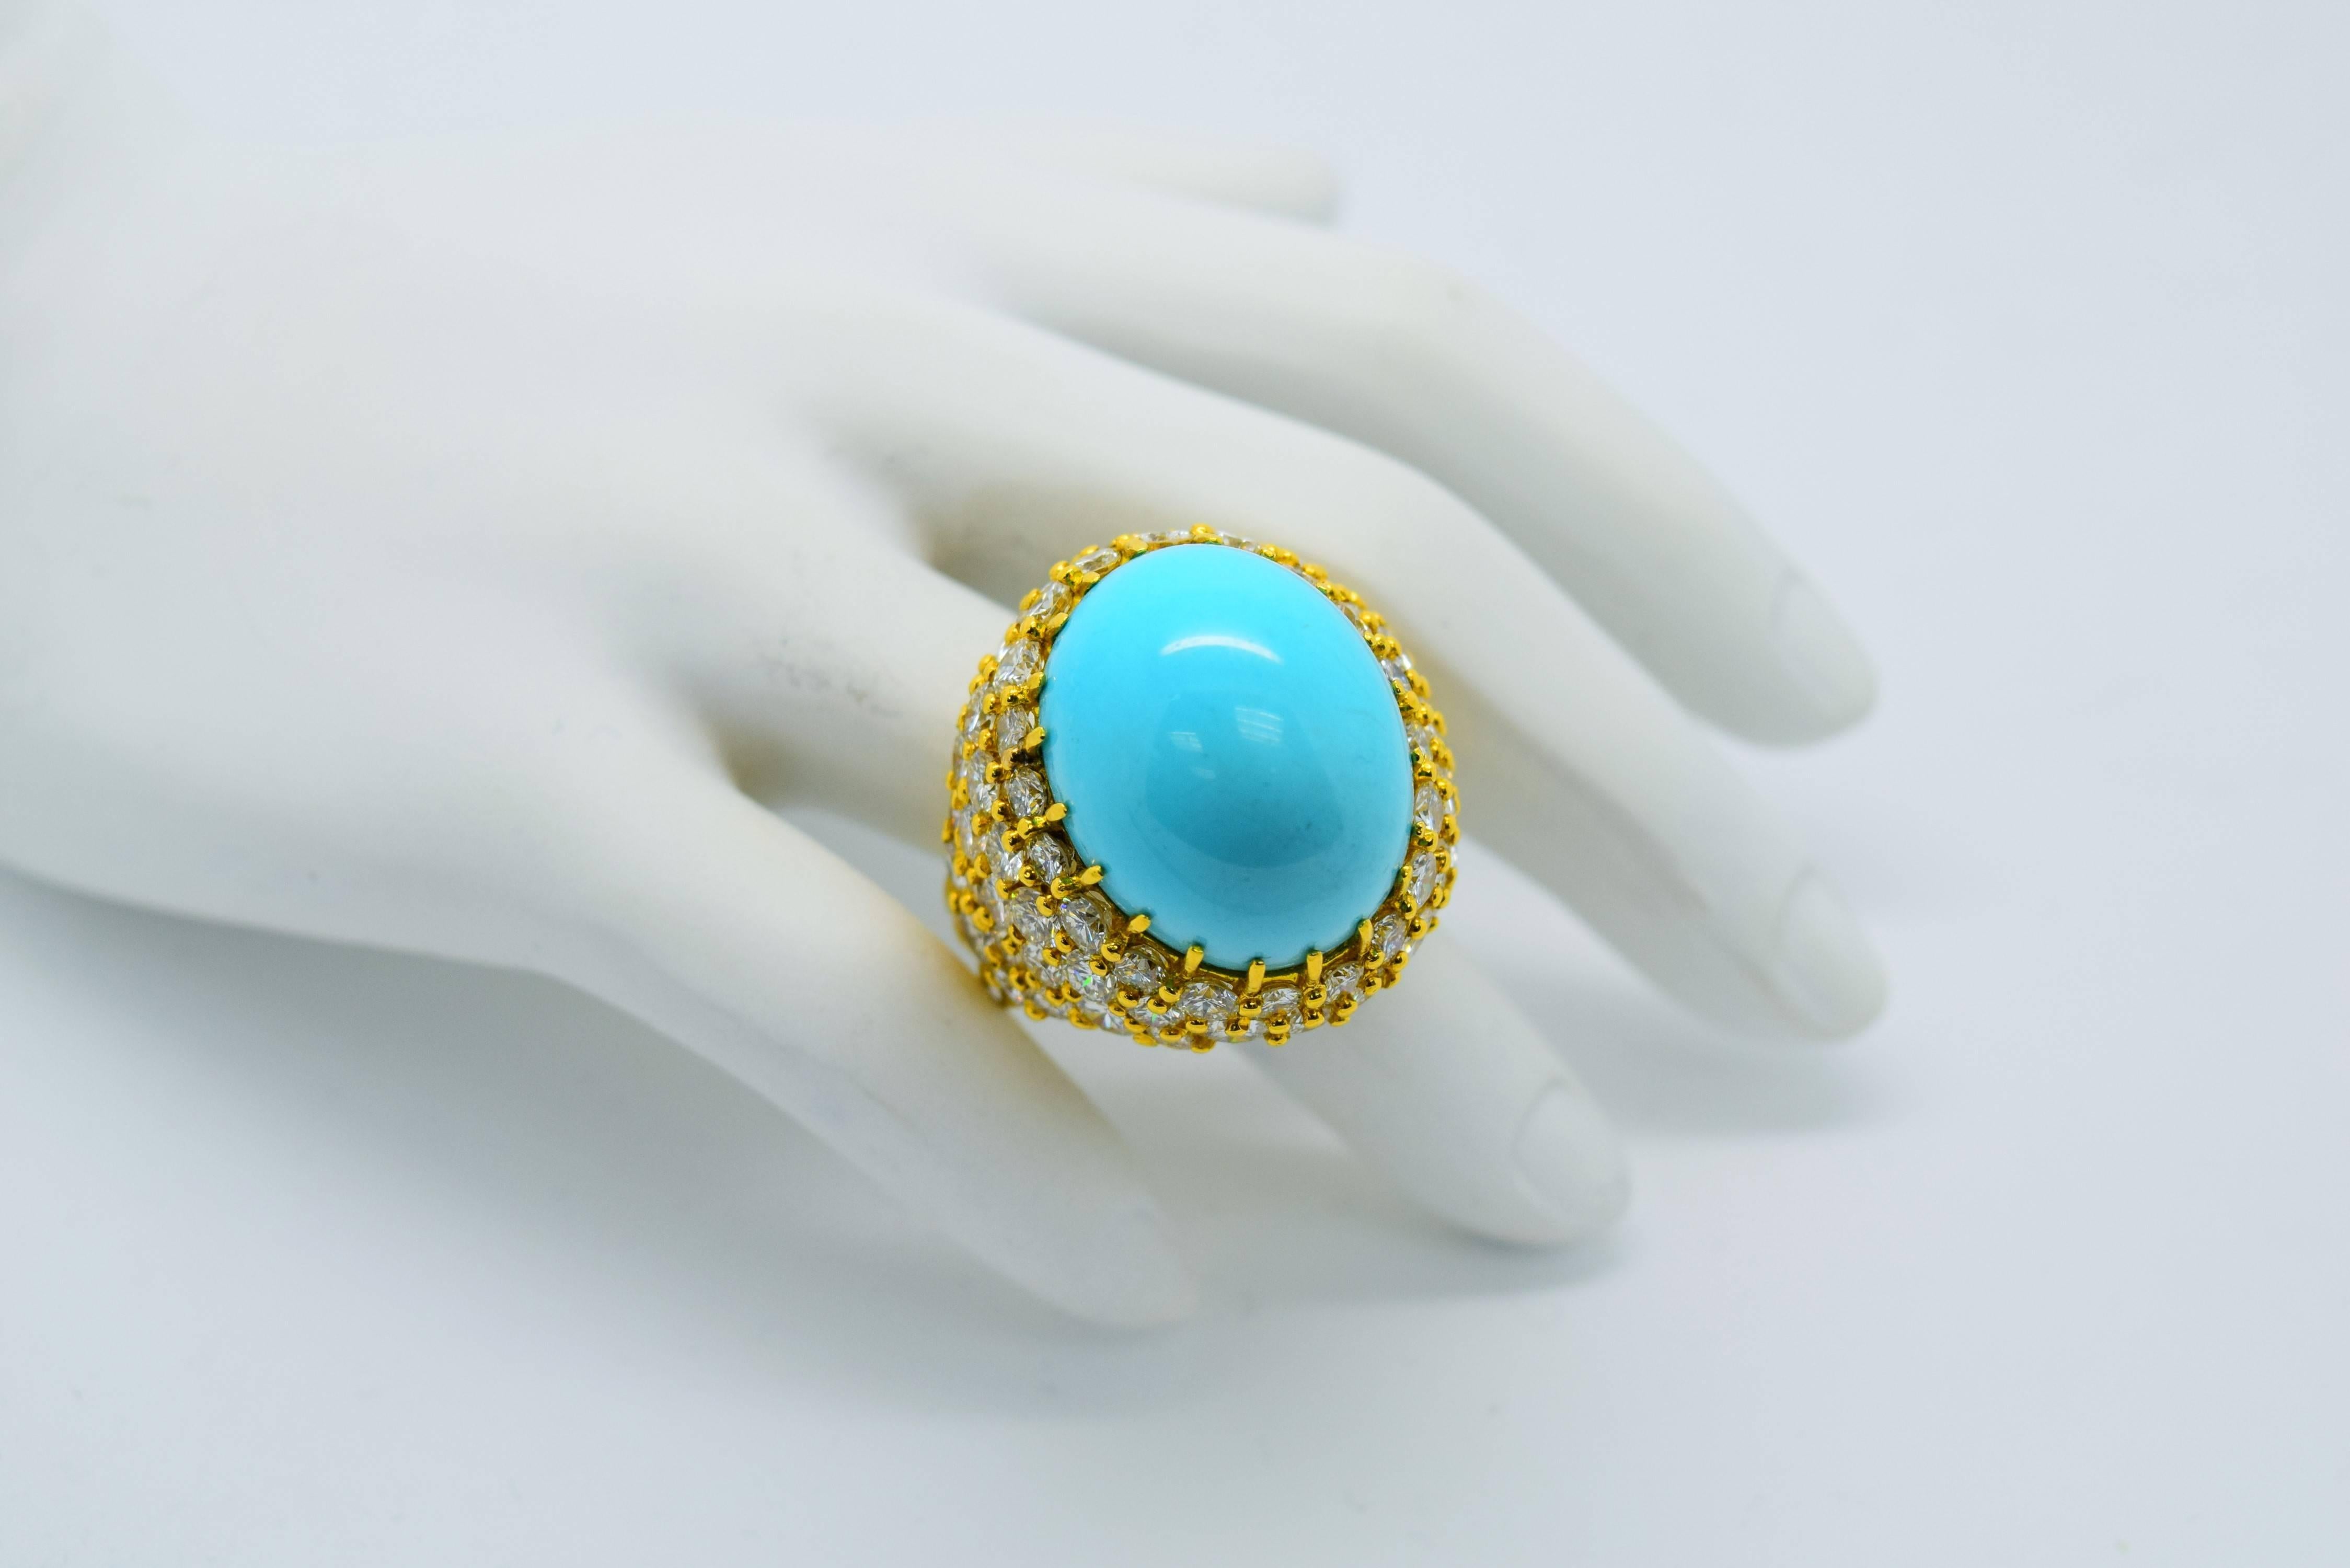 Fine Persian Turquoise and Round Diamond Cocktail Ring set in 18k yellow gold.
Persian Turquoise is approximately 25.02ct and is of fine quality.
The ring is in a beautiful bombe style and has approximately 10.00cttw of 68 fine white and clean